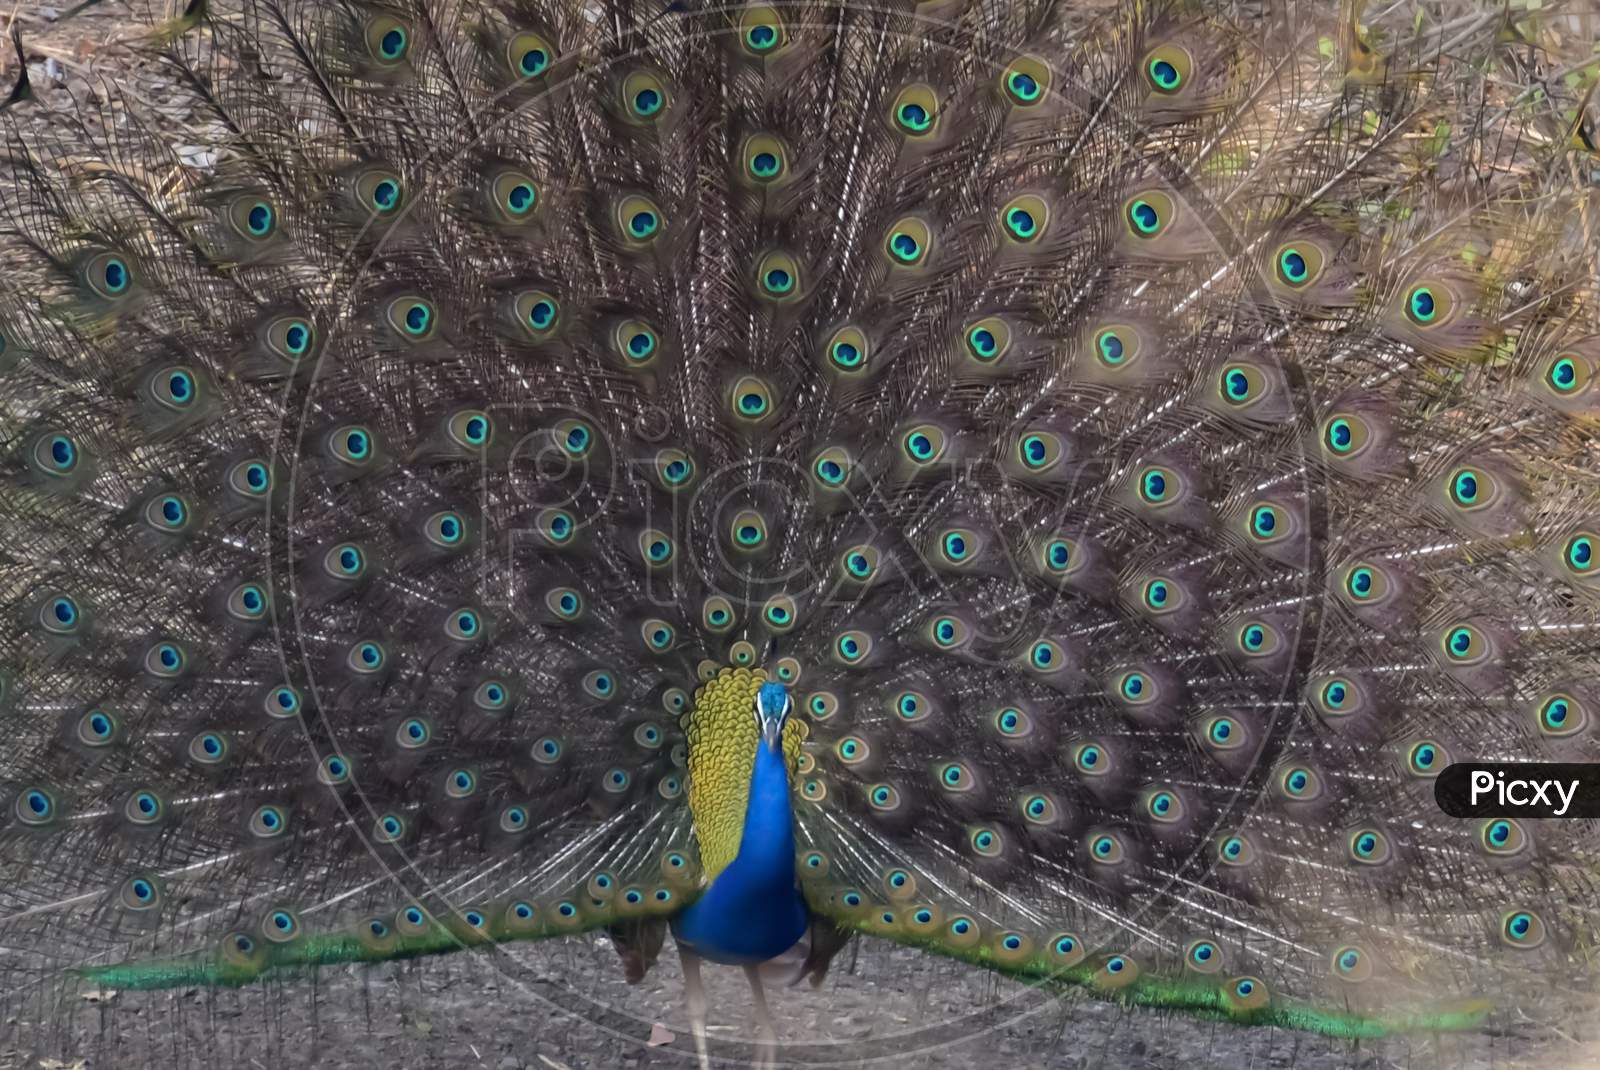 A peacock with its feathers wide open